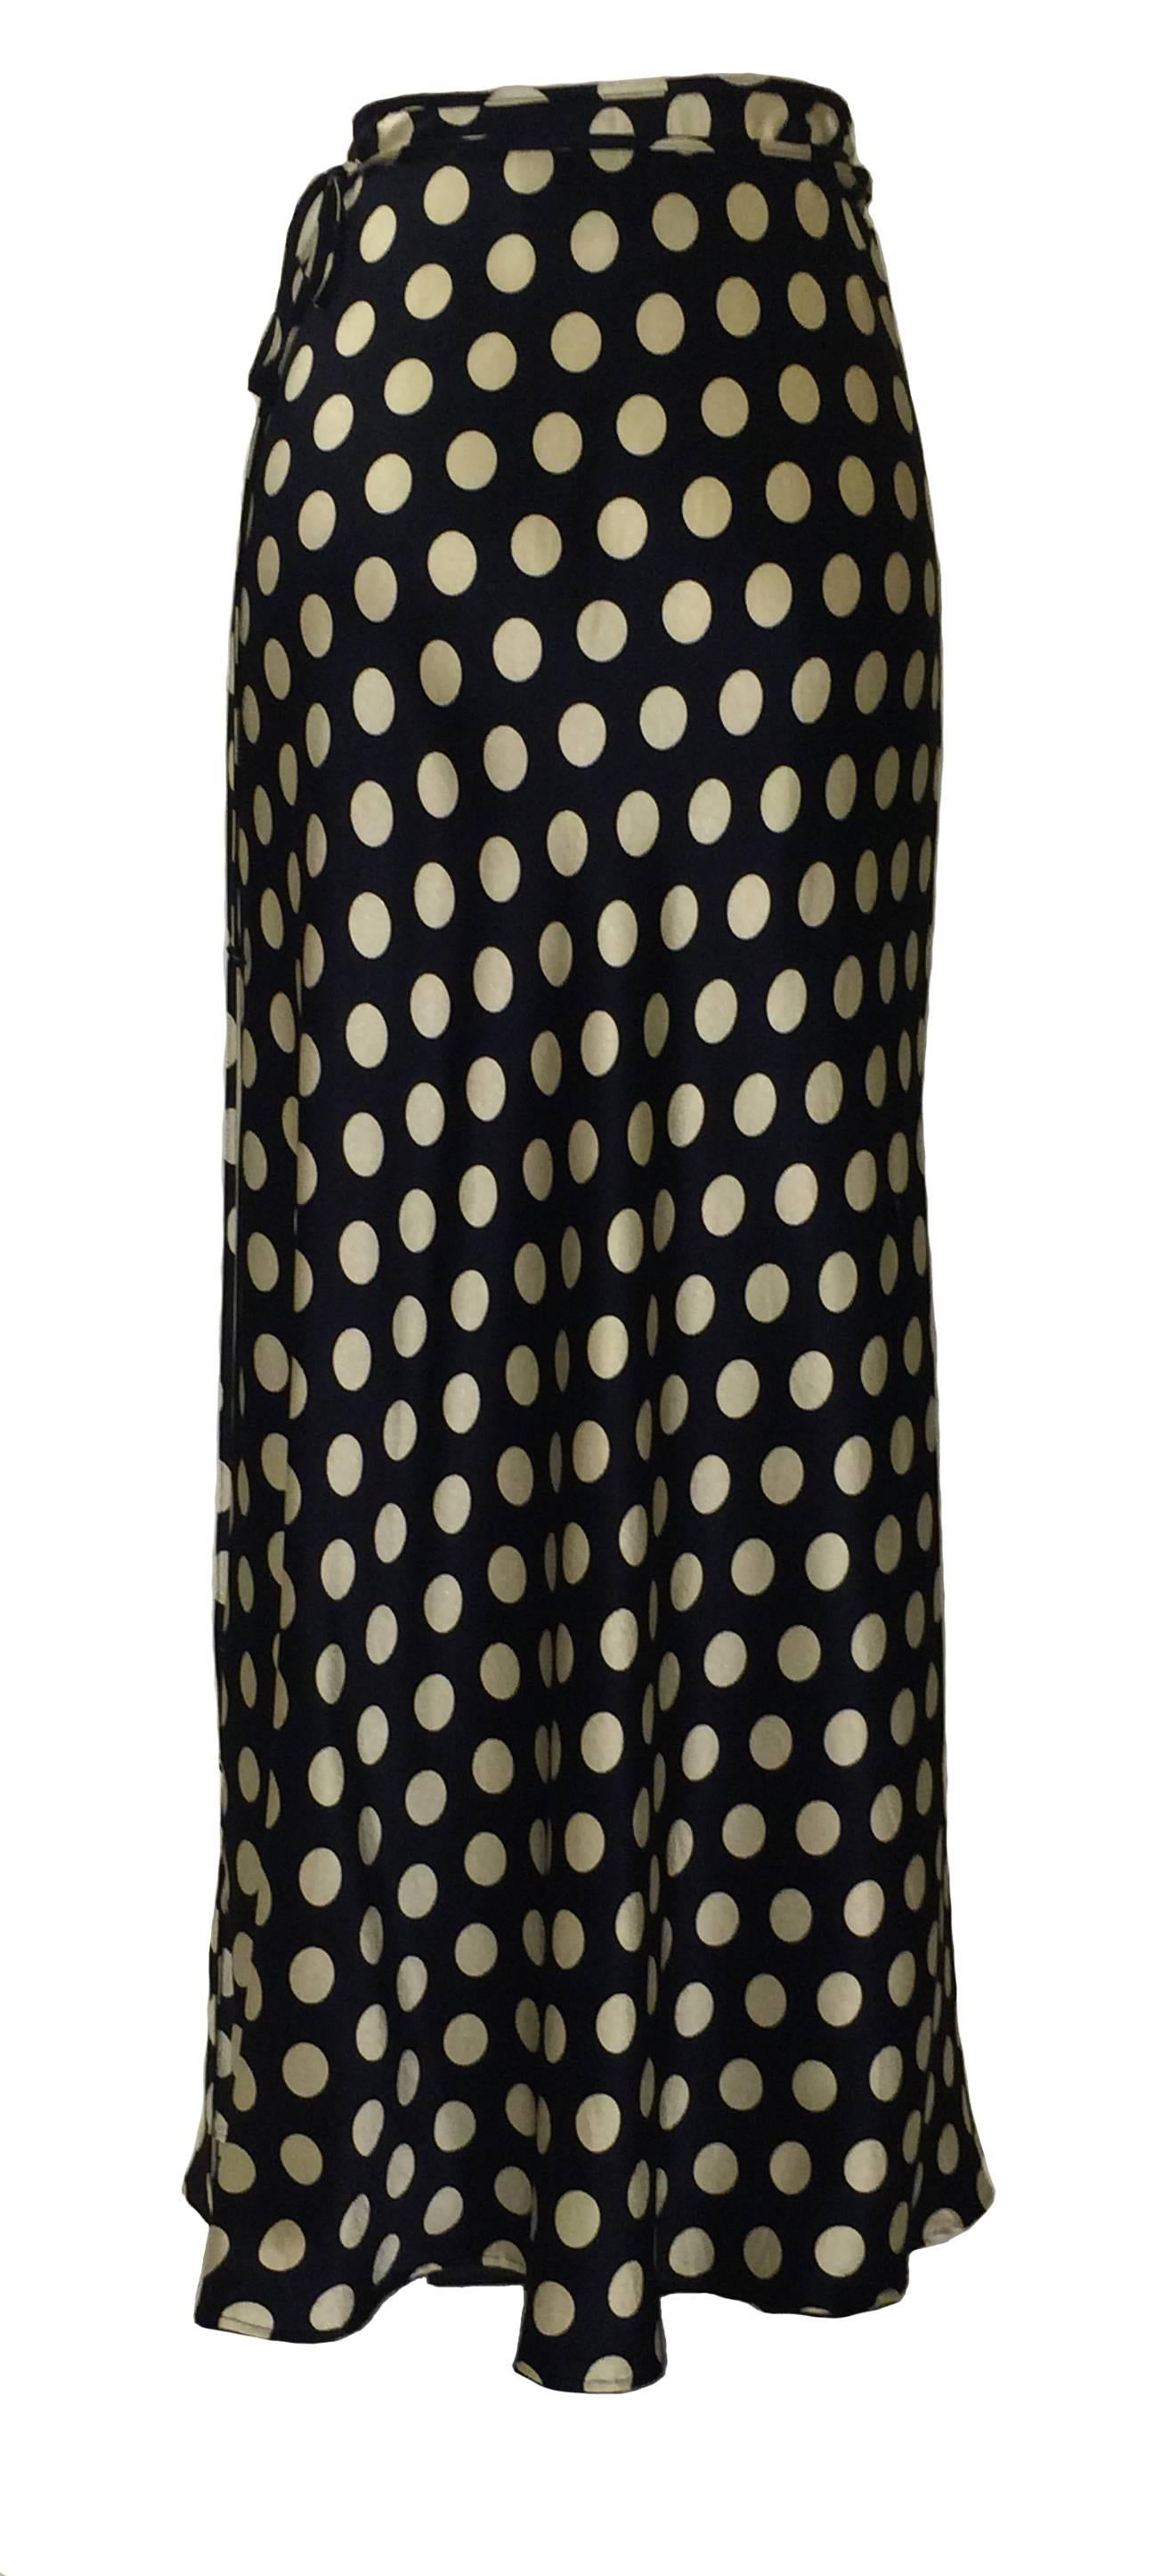 Moschino Couture! 80s black and white silk polka dot wrap maxi skirt.

100% silk.

Made in Italy.

IT 46, US 12. Fits more like modern 6/8. Size somewhat flexible due to wrap style, see measurements.
Waist 29" (based on seams, but can be made